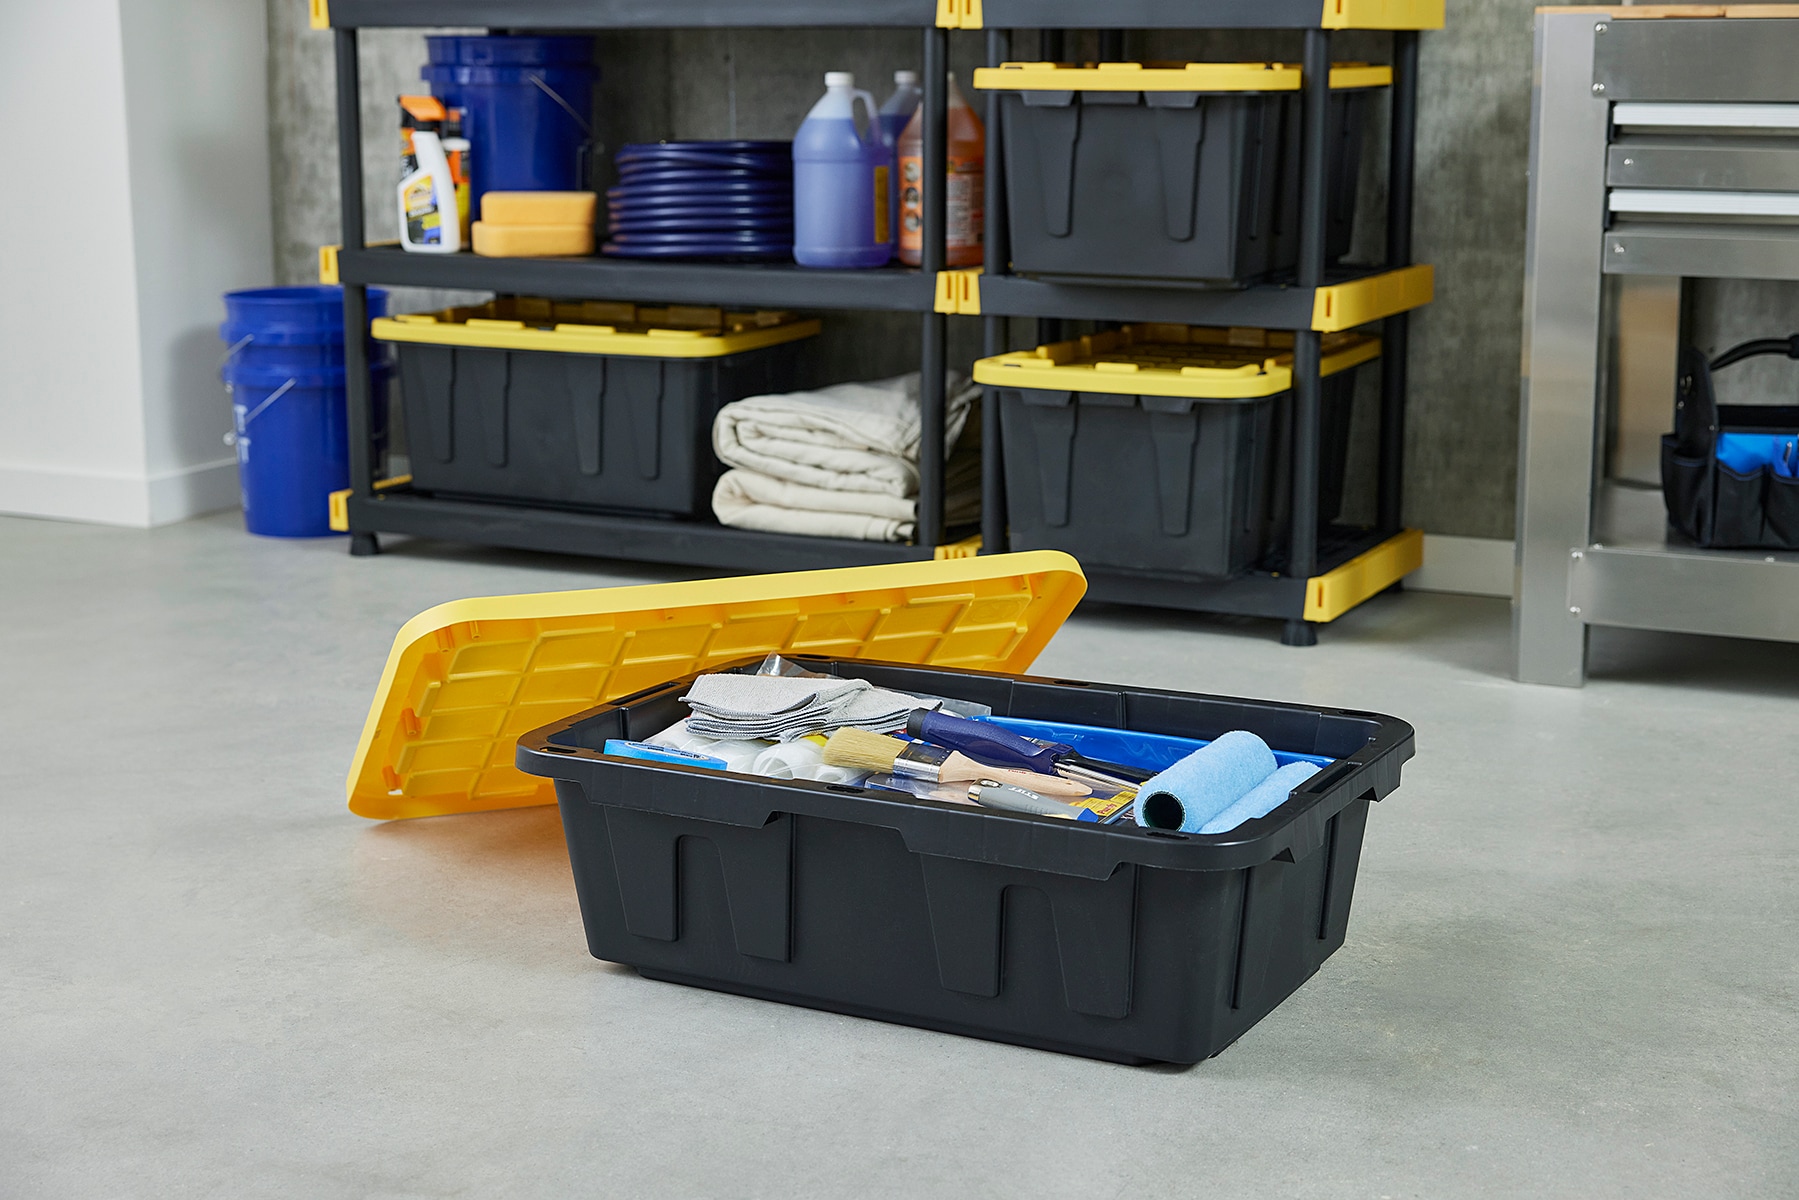 Performax® Industrial 27-Gallon Black Storage Tote with Snap-On Lid at  Menards®